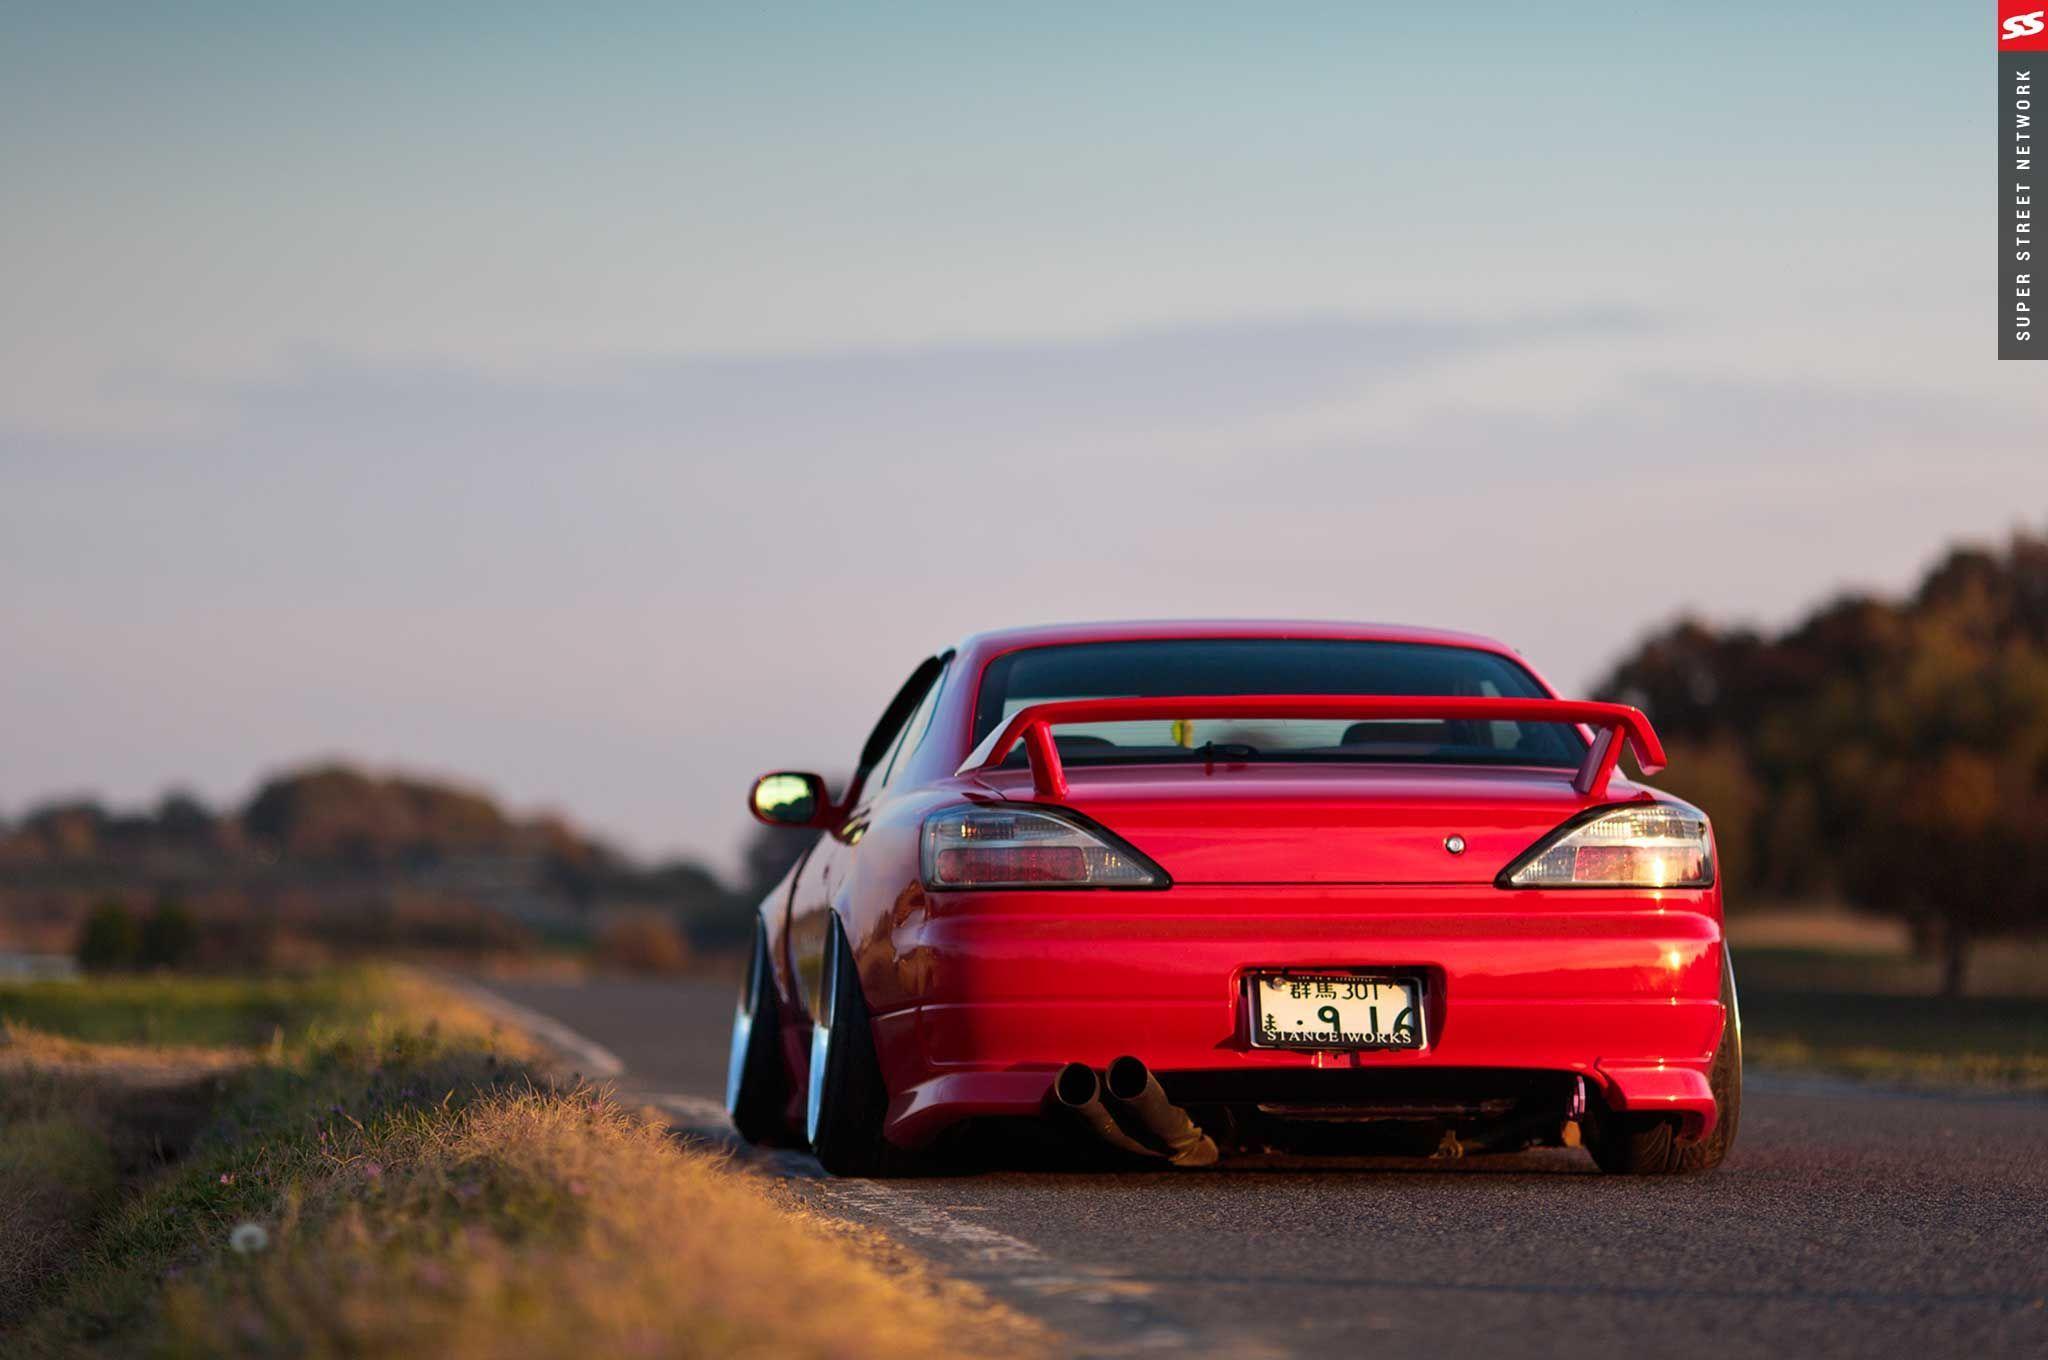 Nissan Silvia S15 Destroy Repeat Photo & Image Gallery